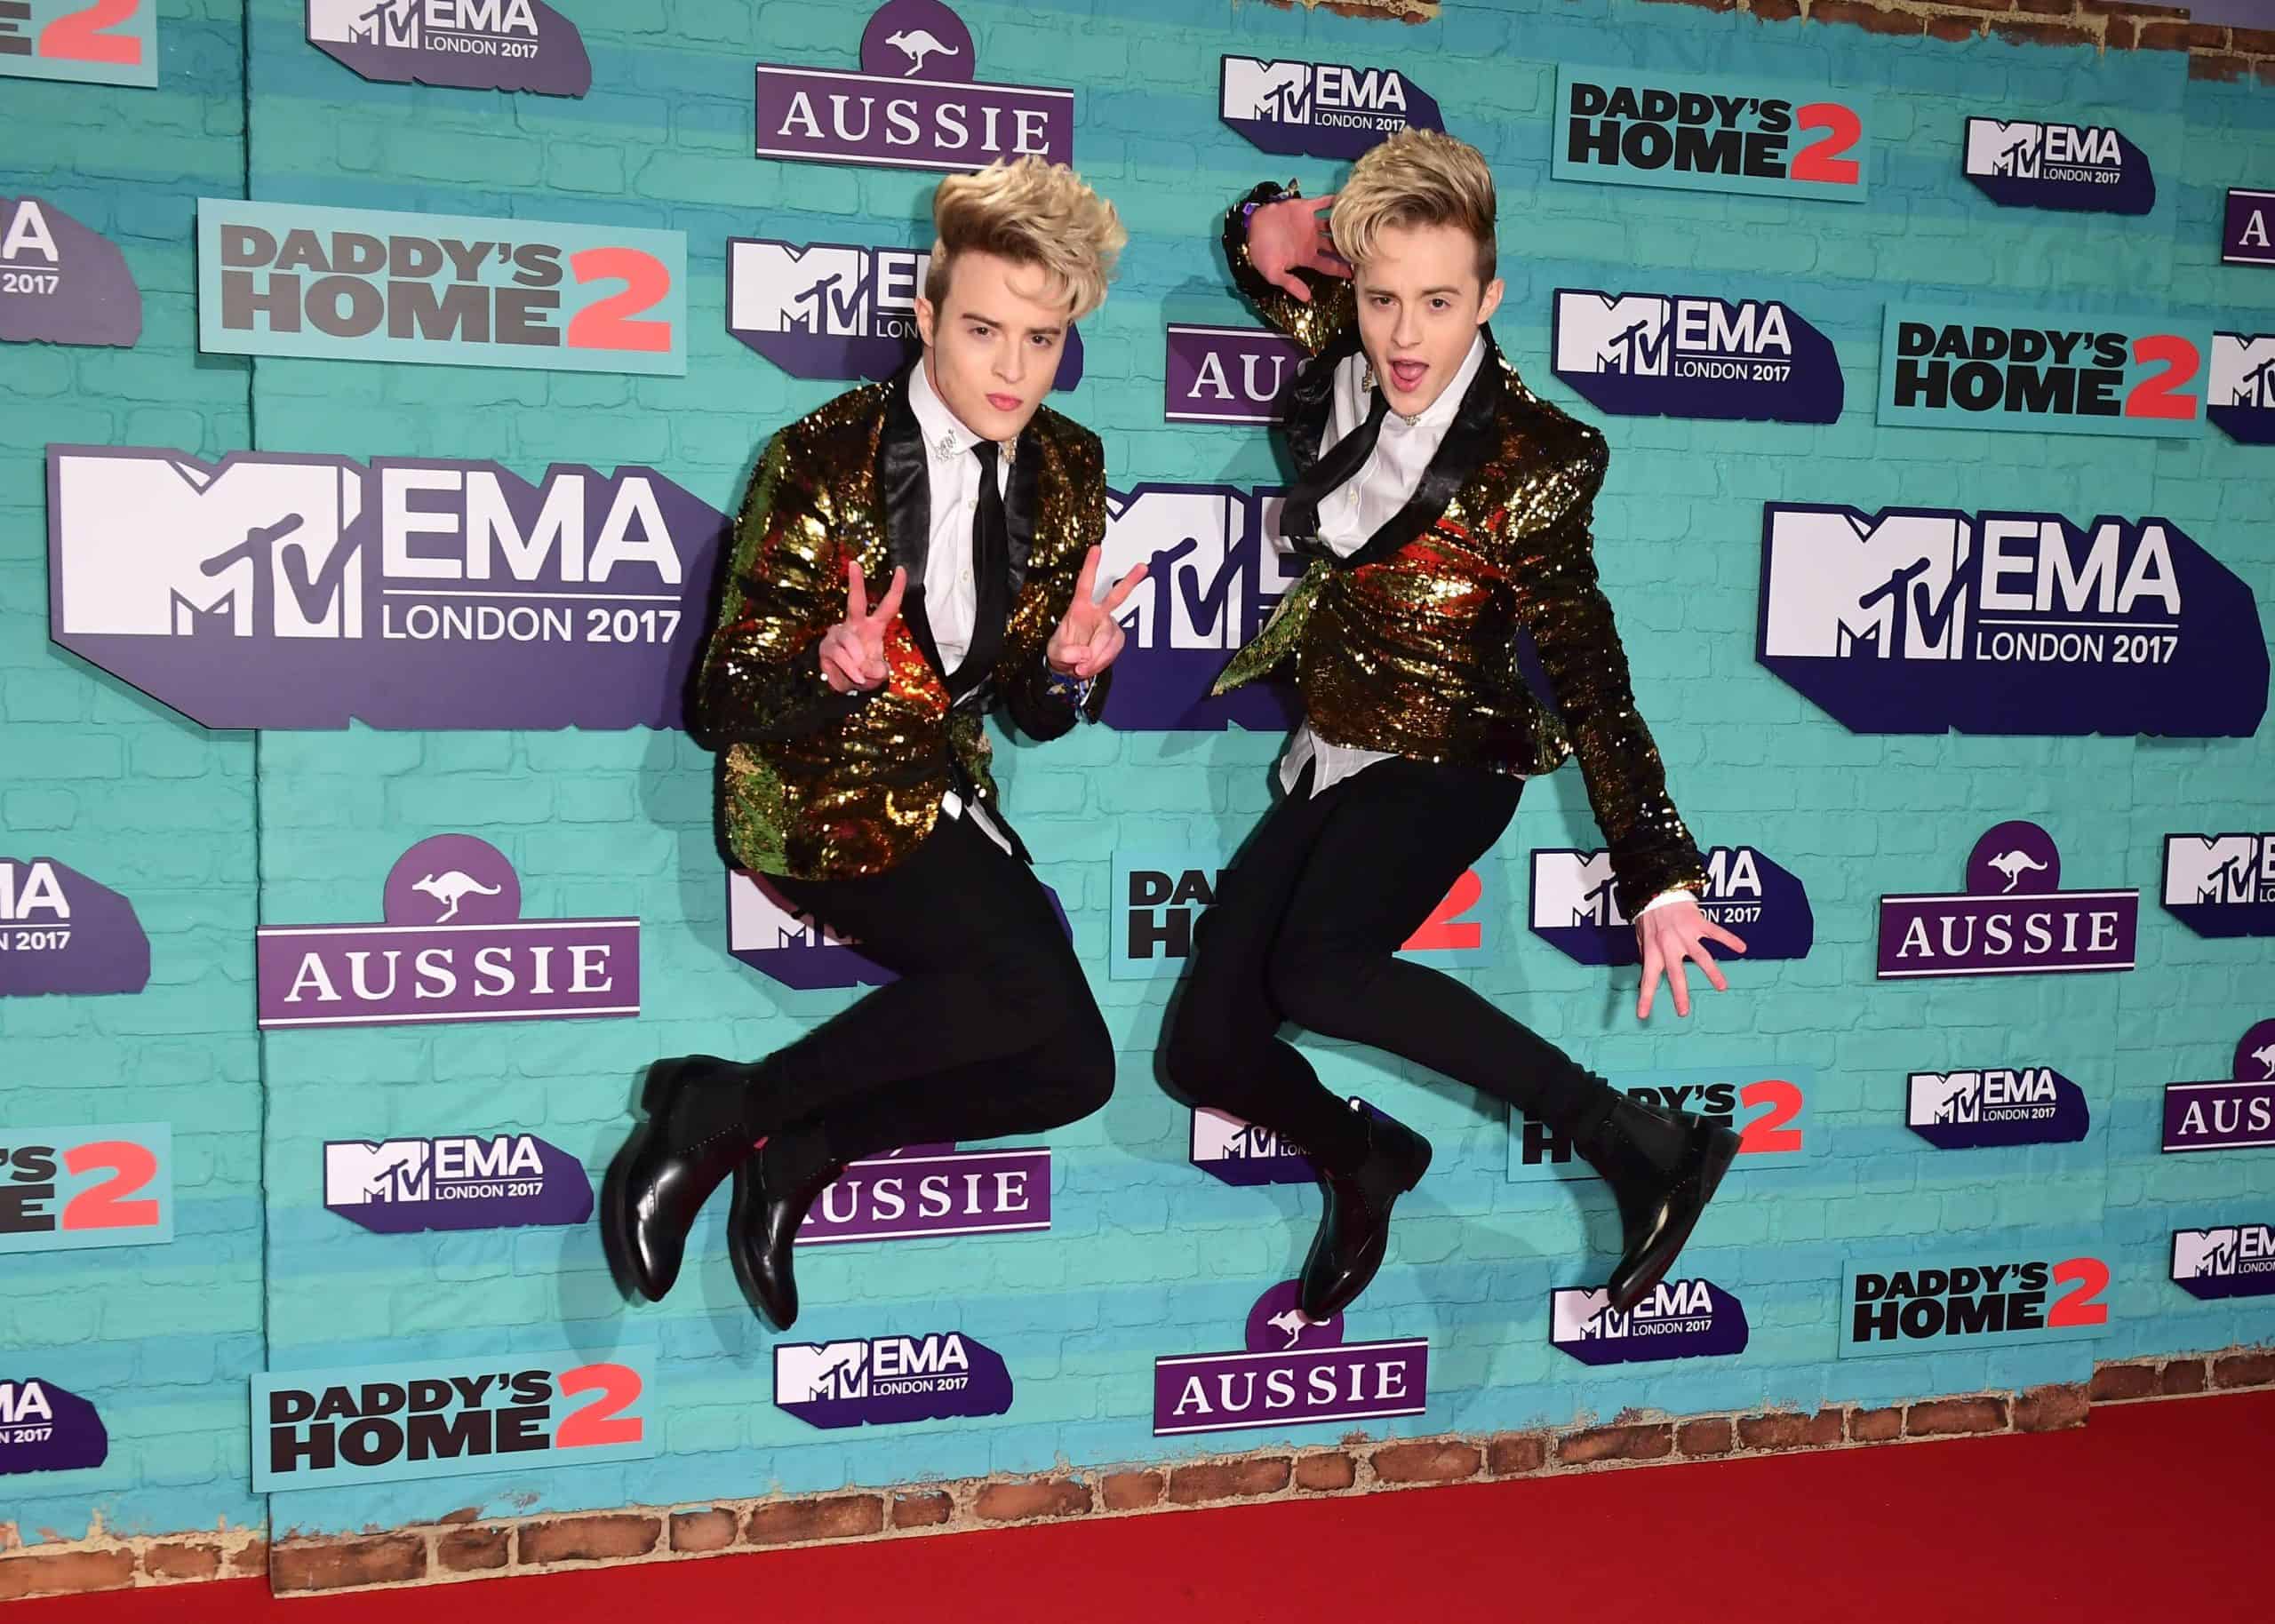 Jedward have been pulled into a row over Queen comments